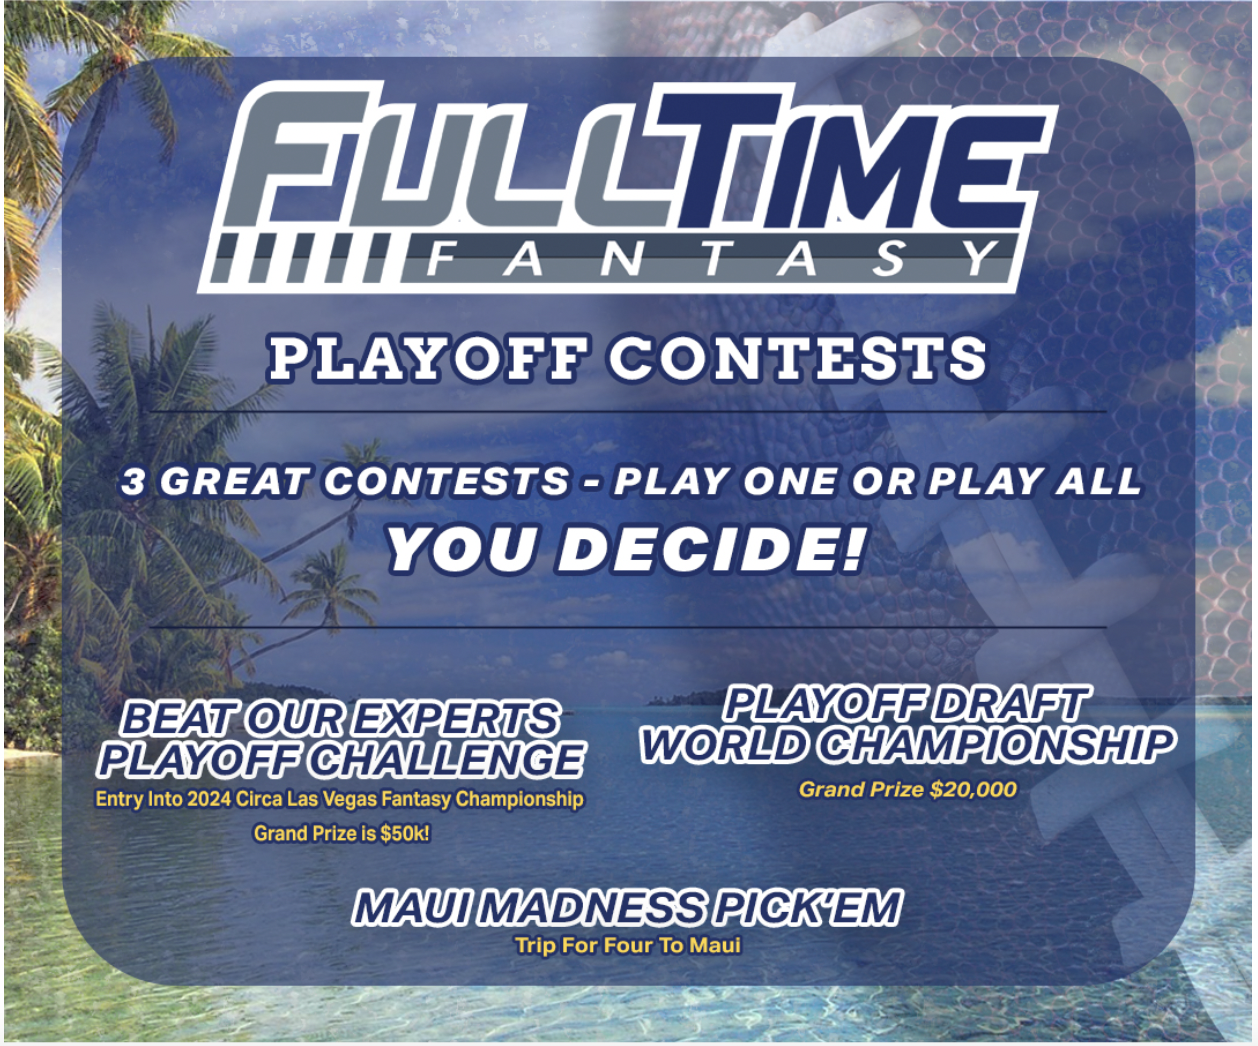 Play One OR Play All Three Great Playoff Contests!